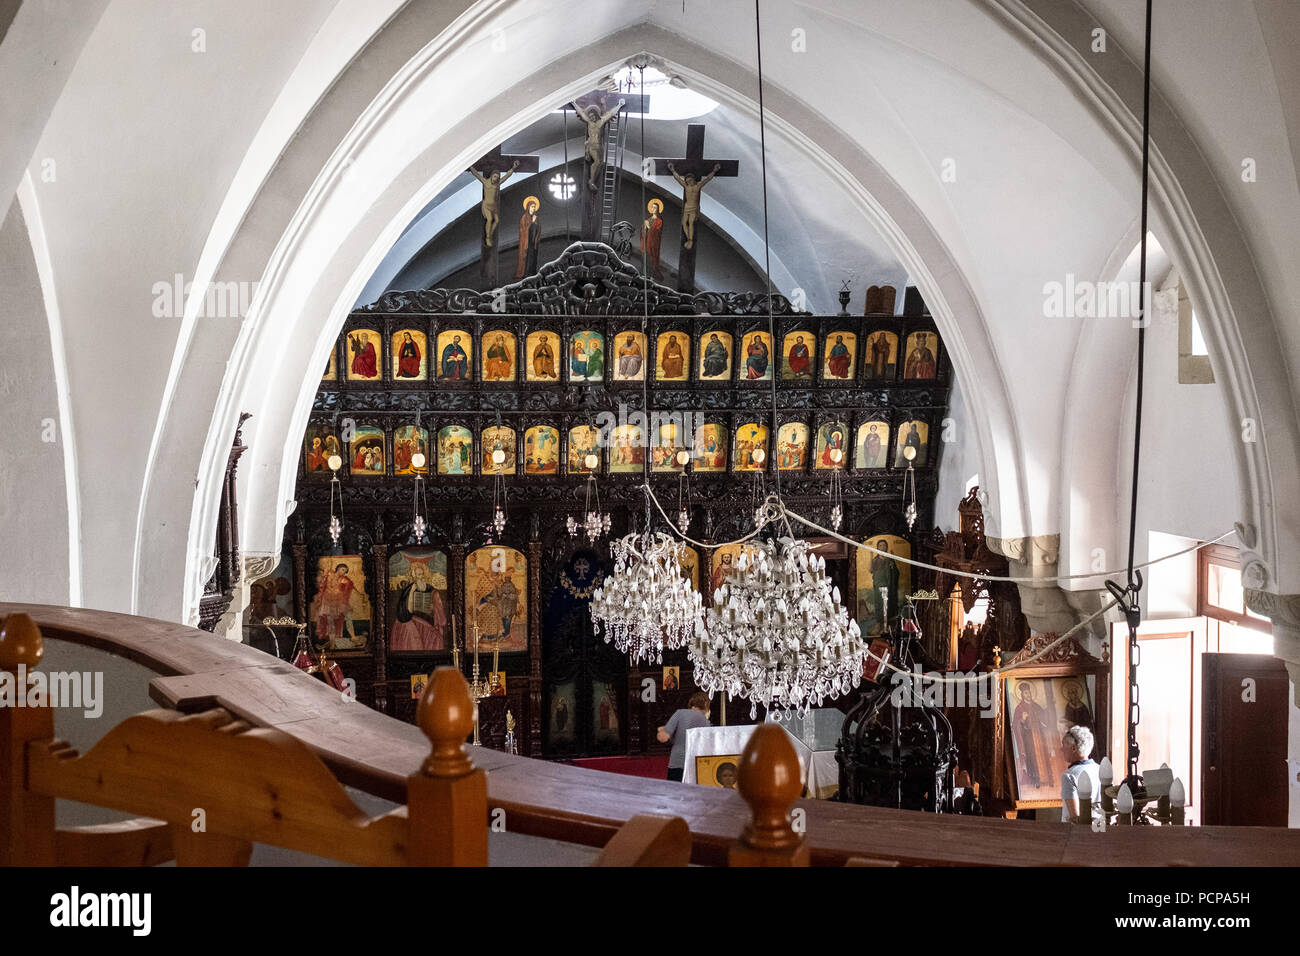 Interior of picturesque church, Holy Church of Saints Constantine and Helen situated in the scenic village of Tochni, Larnaca region of Cyprus Stock Photo